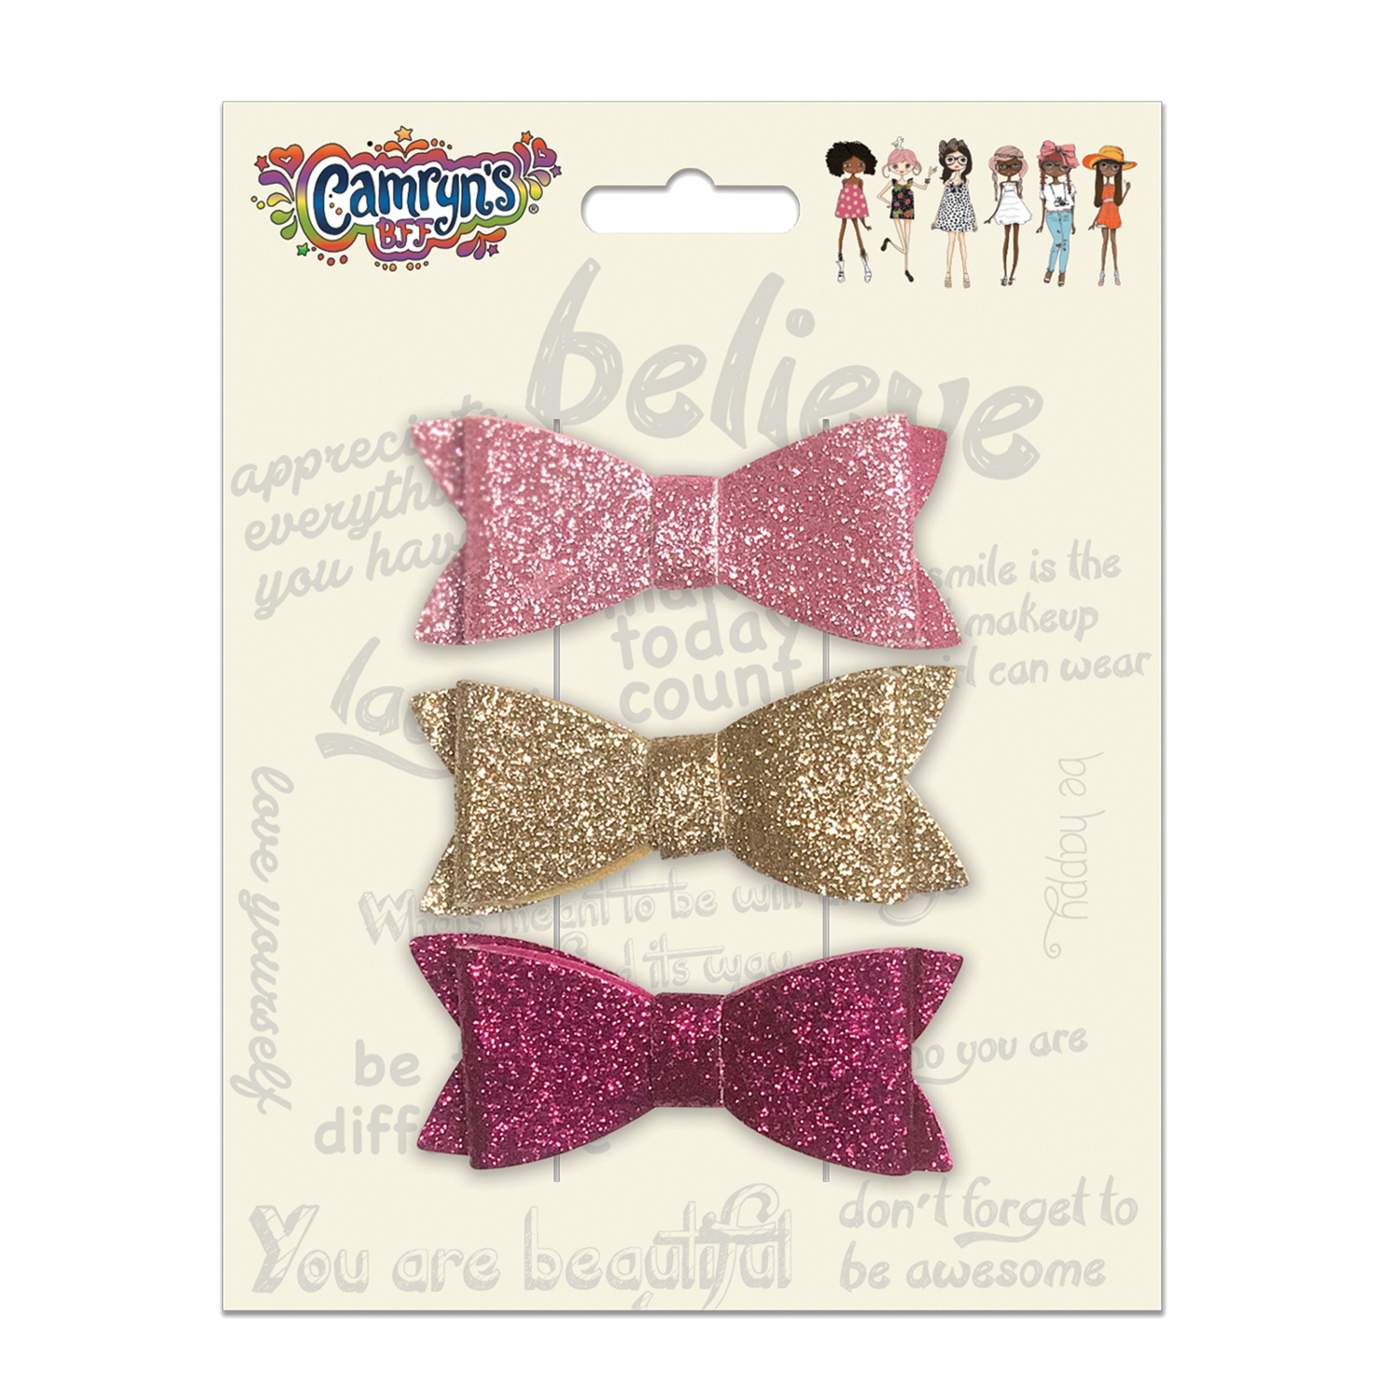 Camryn's BFF Glitter Hair Clip Set; image 1 of 2